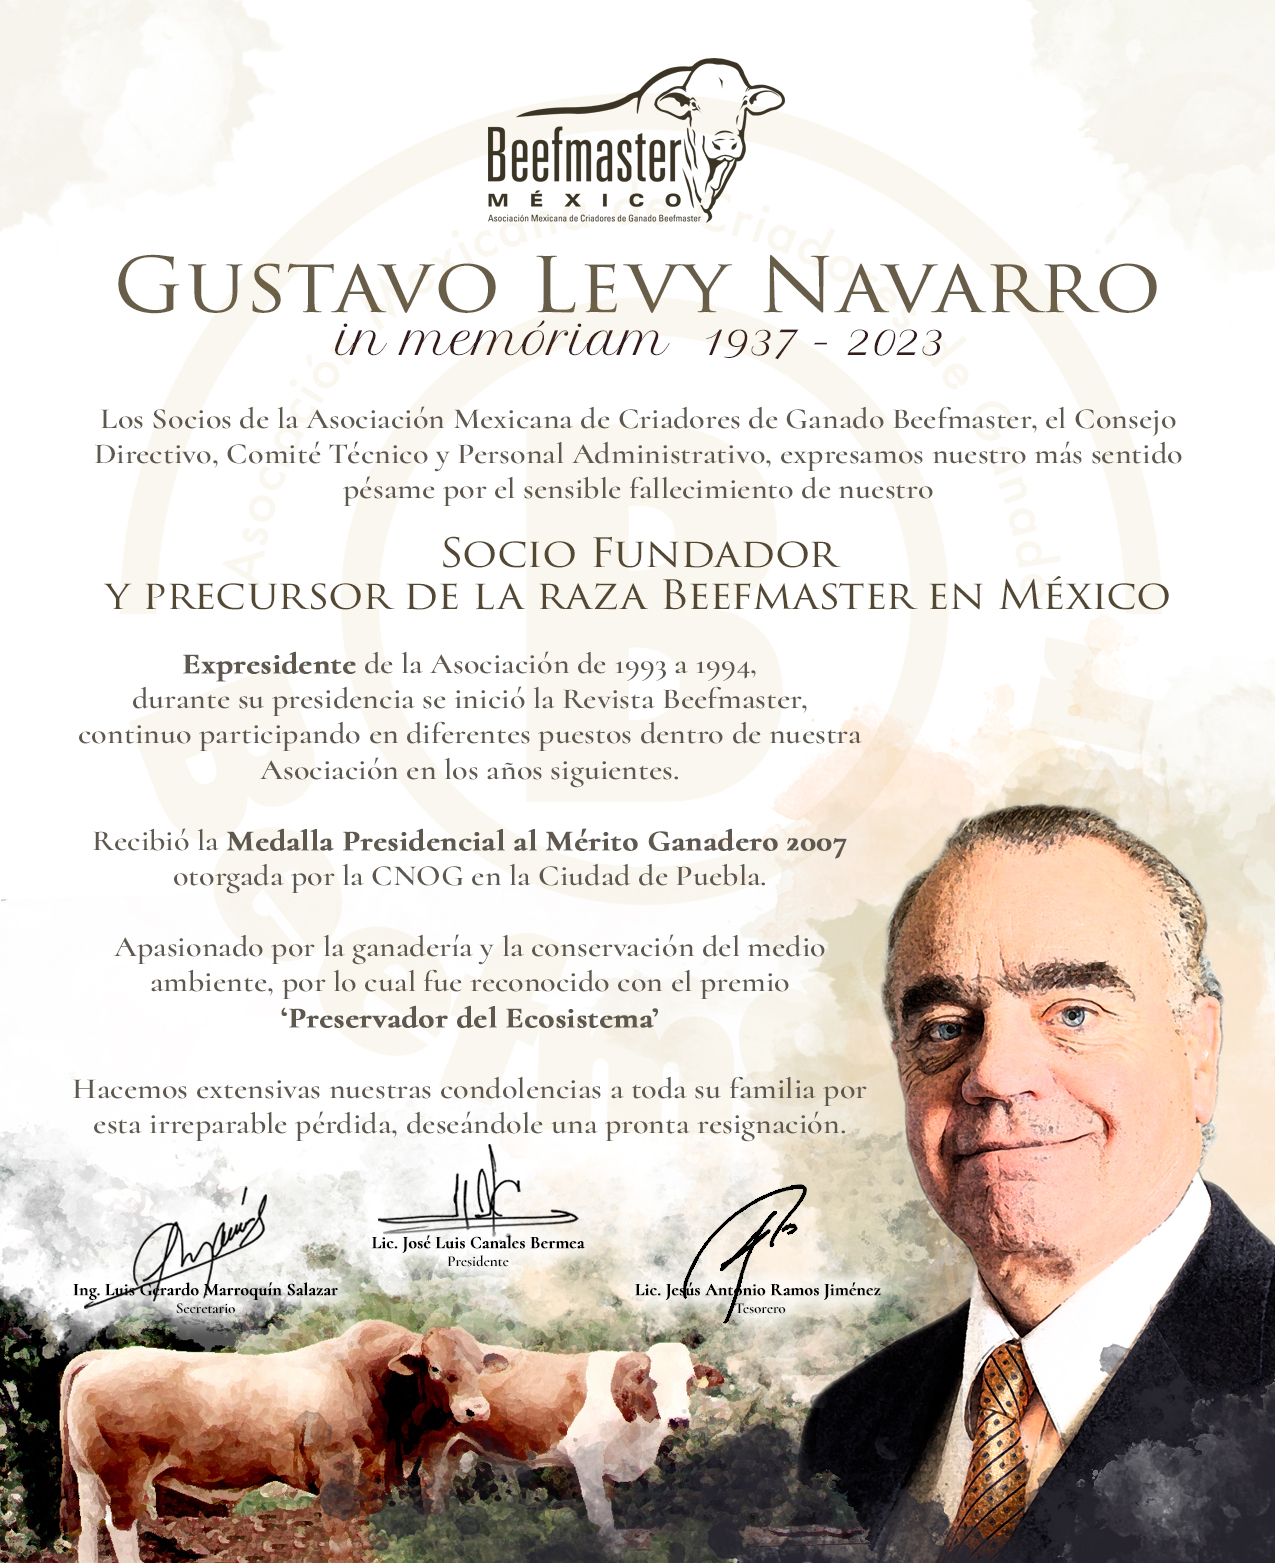 Various reactions to the death of Gustavo Levy could be seen through Twitter Photo: (Twitter/@beefmastermx)